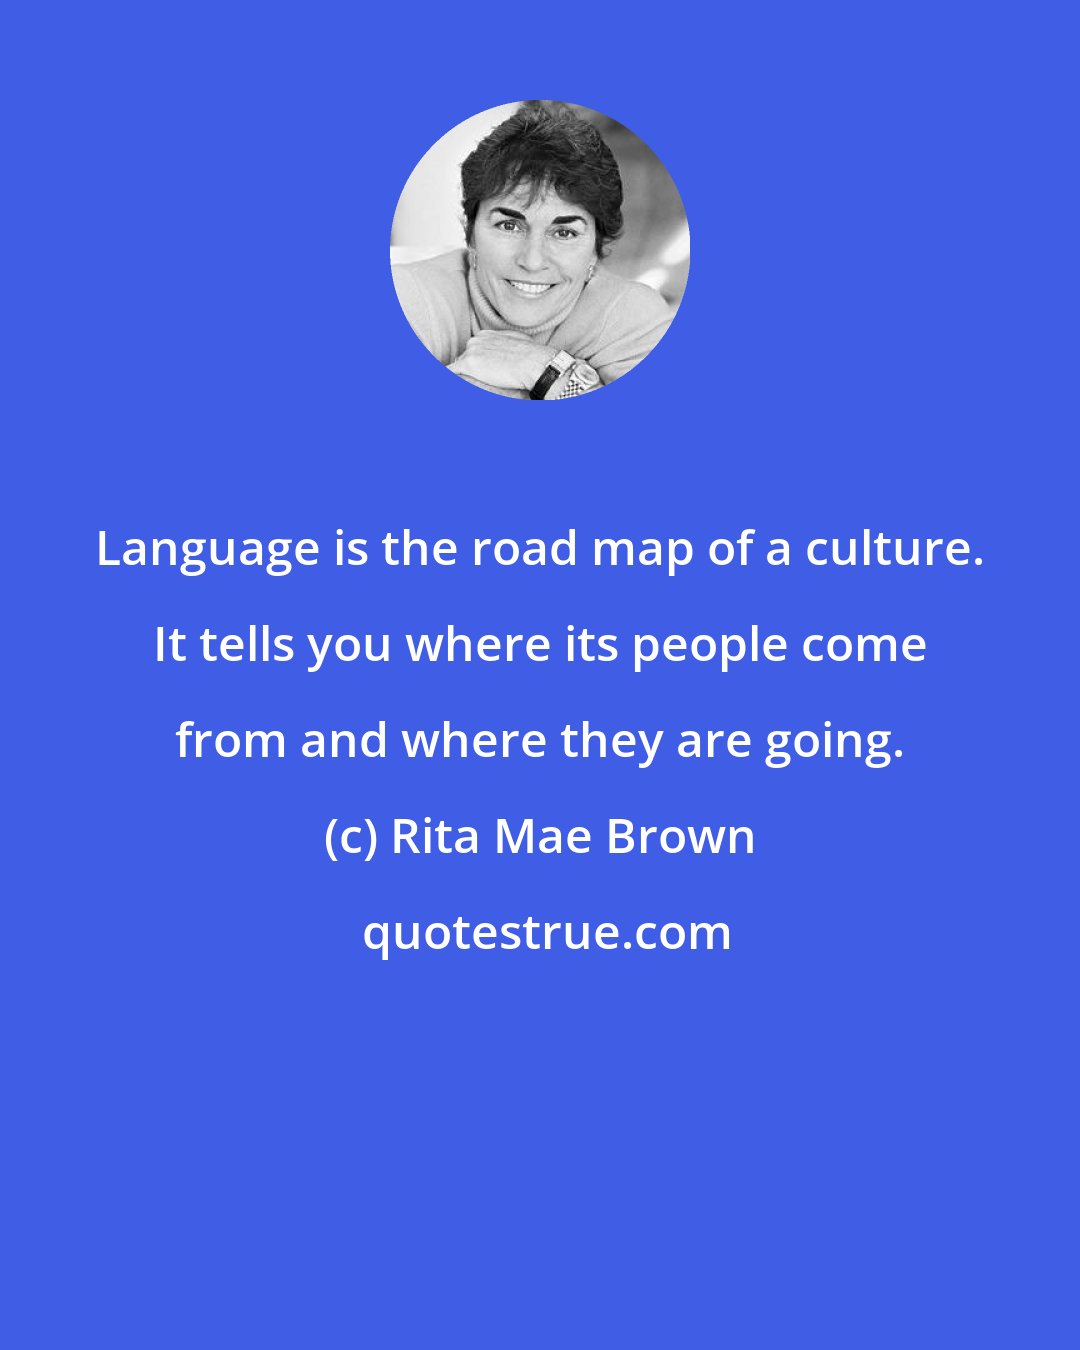 Rita Mae Brown: Language is the road map of a culture. It tells you where its people come from and where they are going.